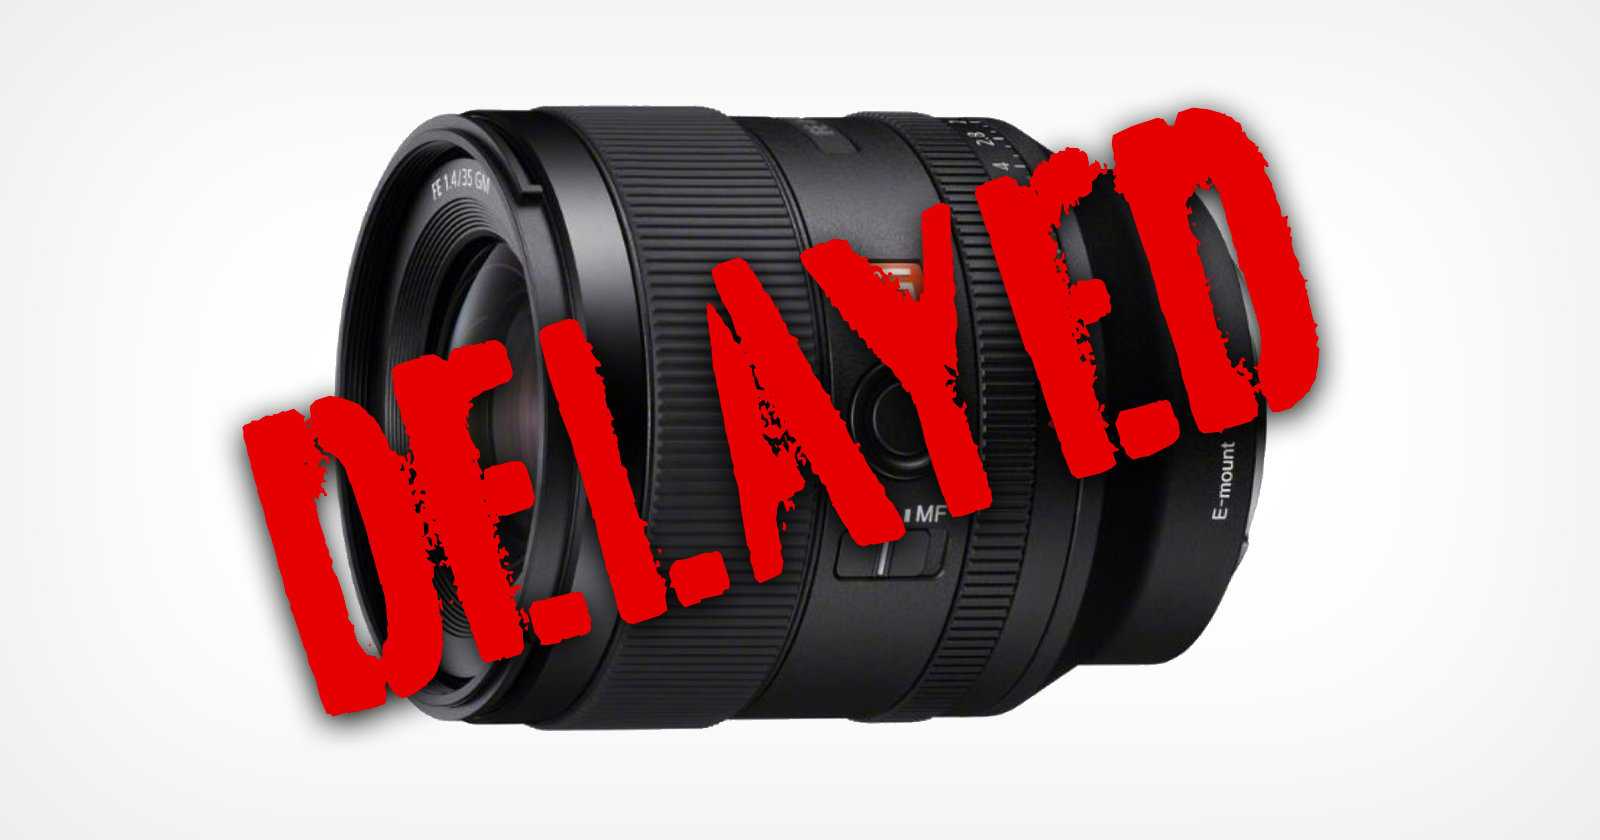 Sonylensex - The Highly-Anticipated Sony 35mm f/1.4 GM is Delayed Indefinitely |  PetaPixel